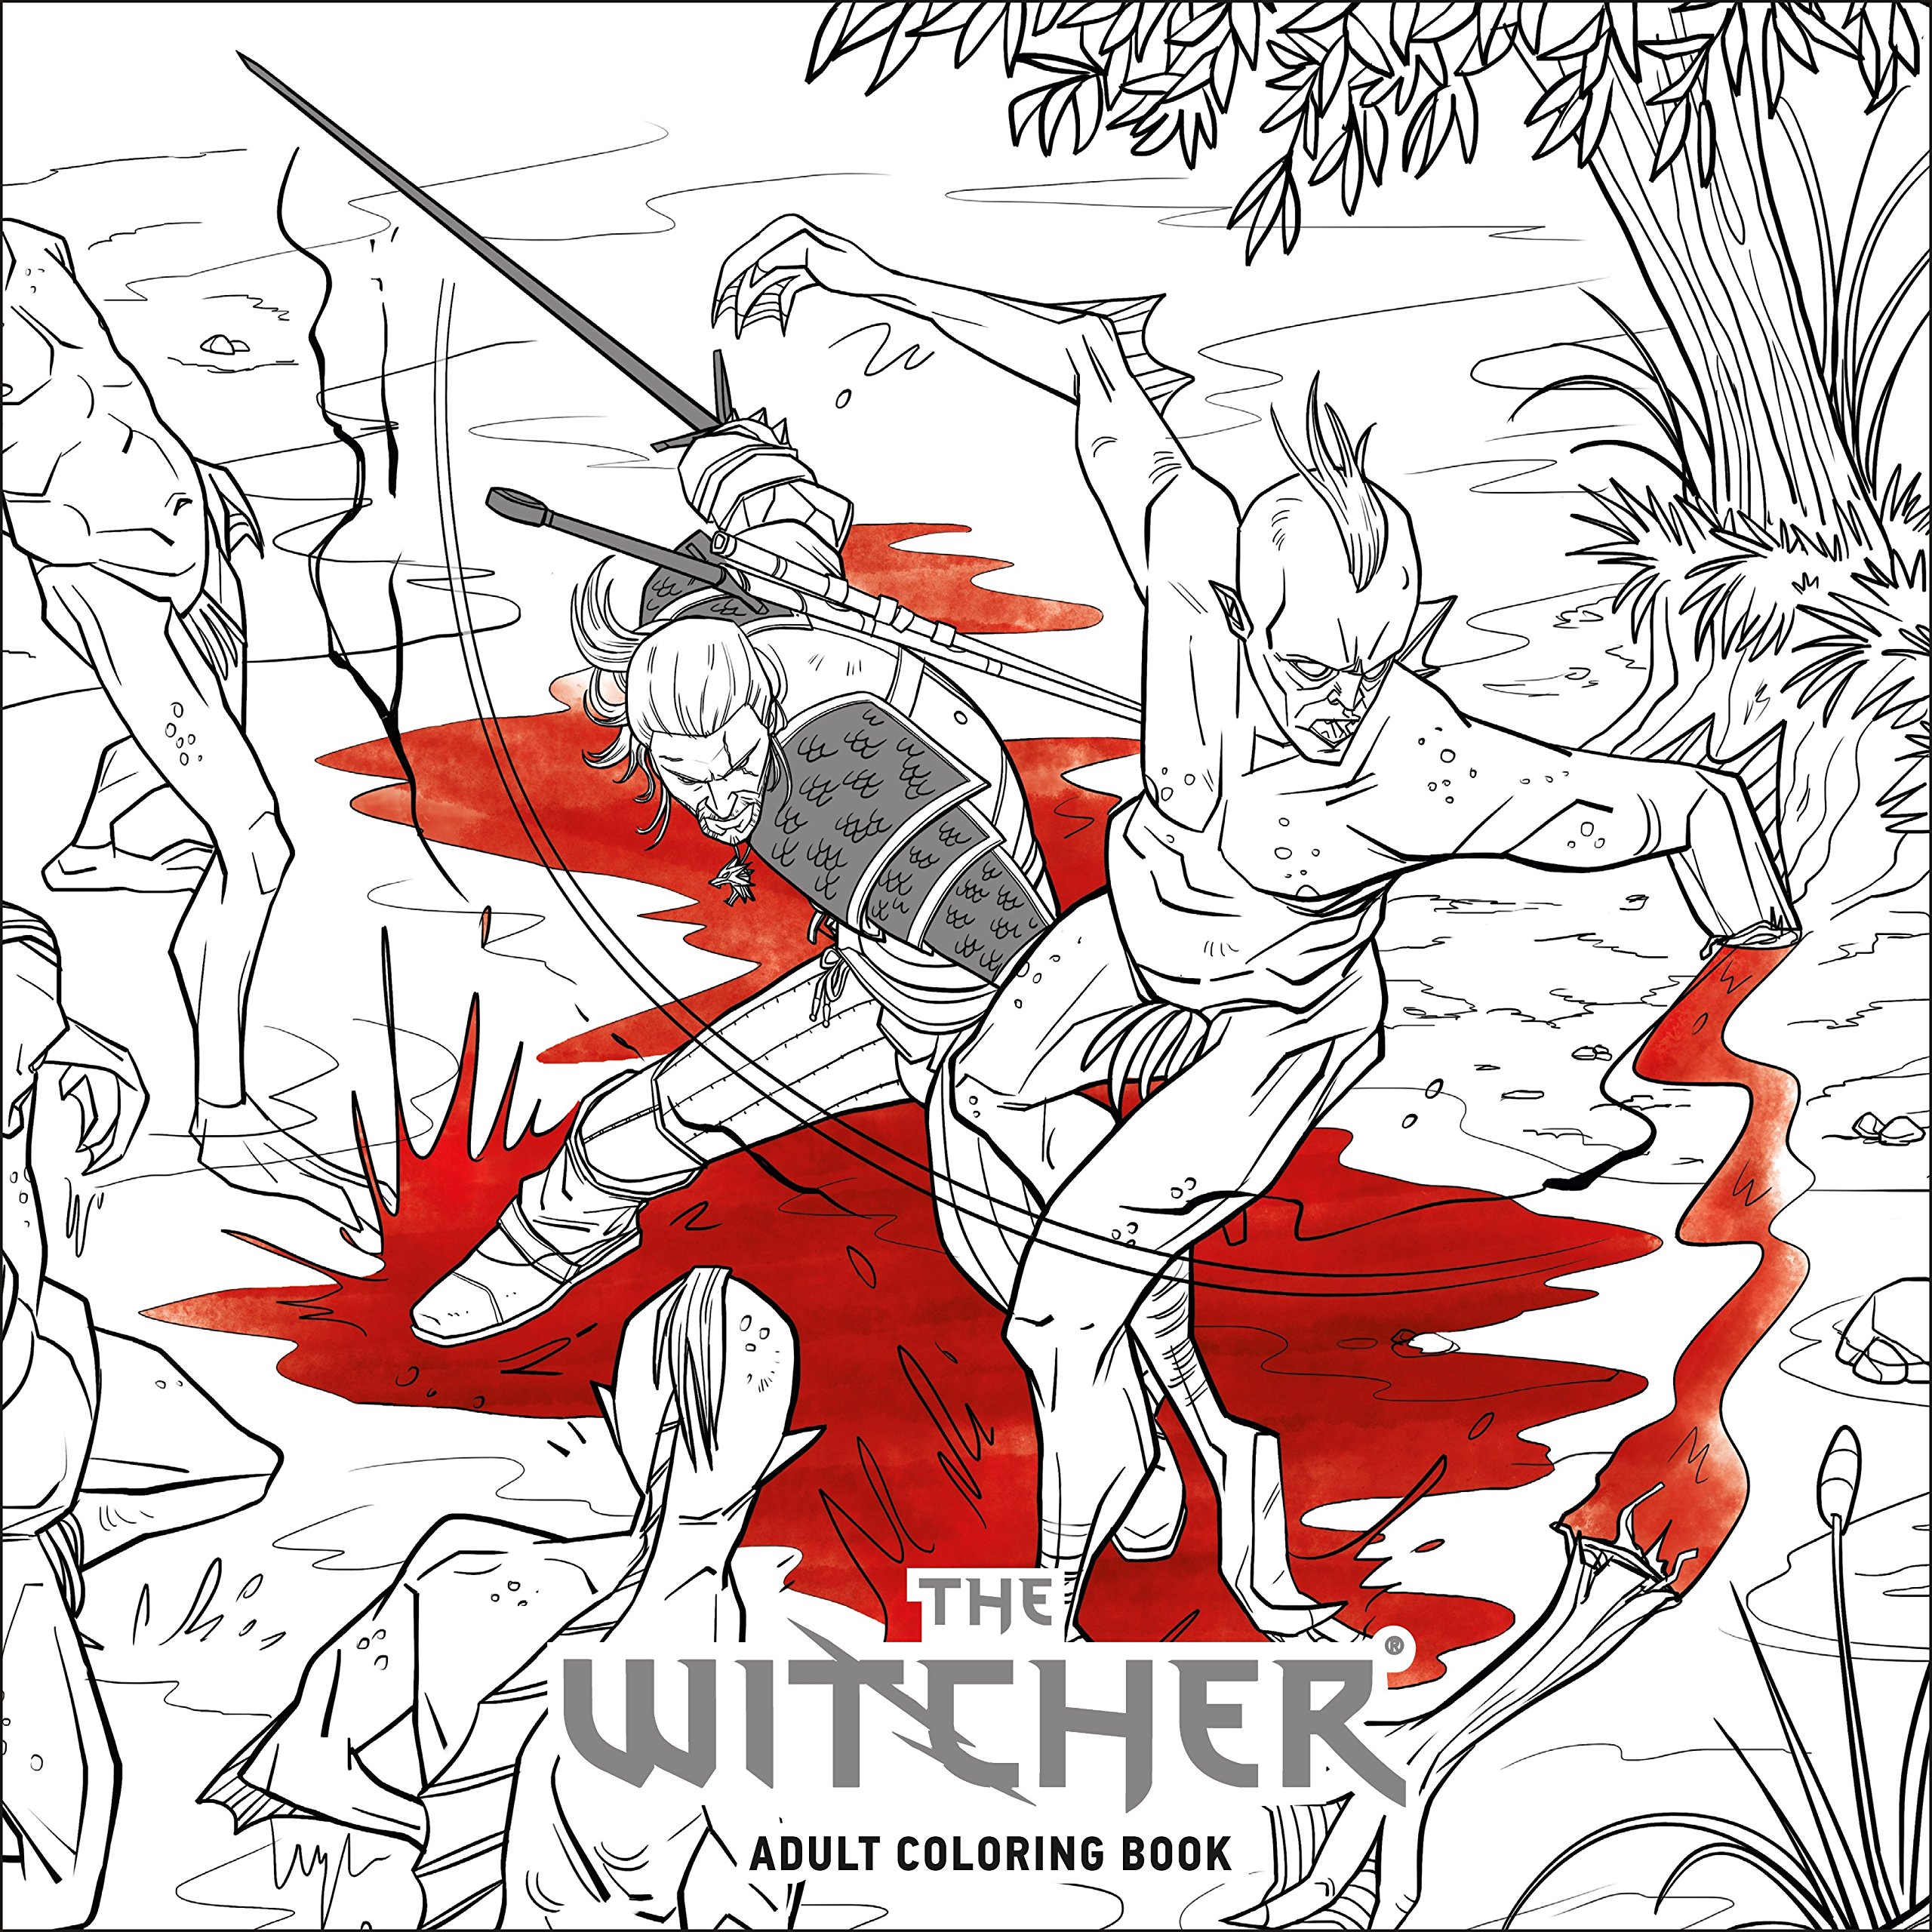 Download Witcher The Adult Coloring Book Art And Reference Books Retromags Community